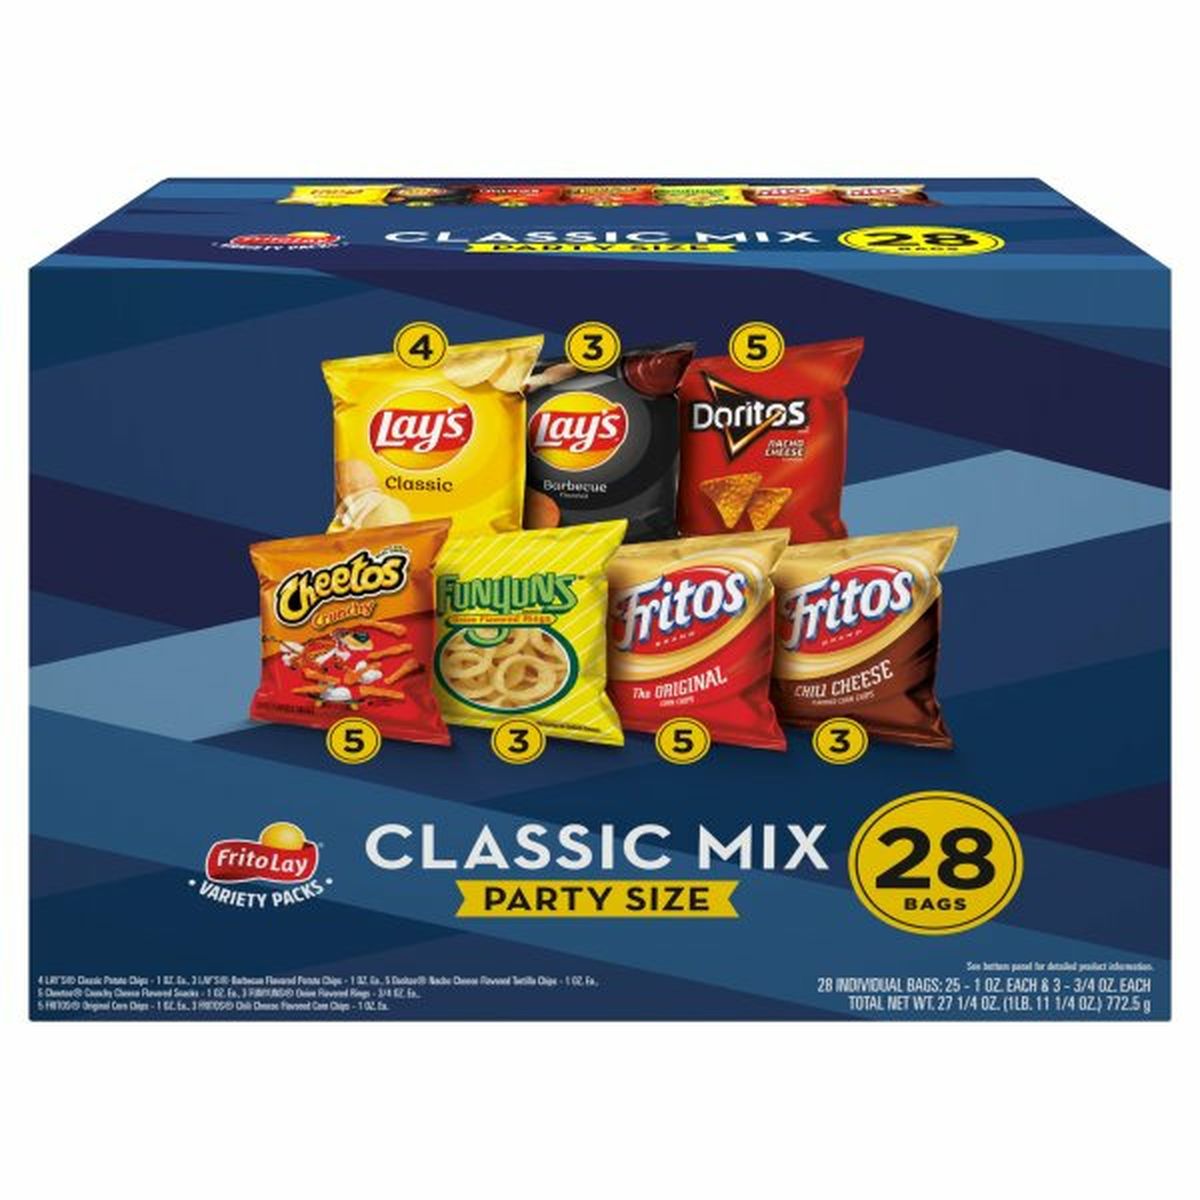 Calories in Lay's Snacks, Party Mix